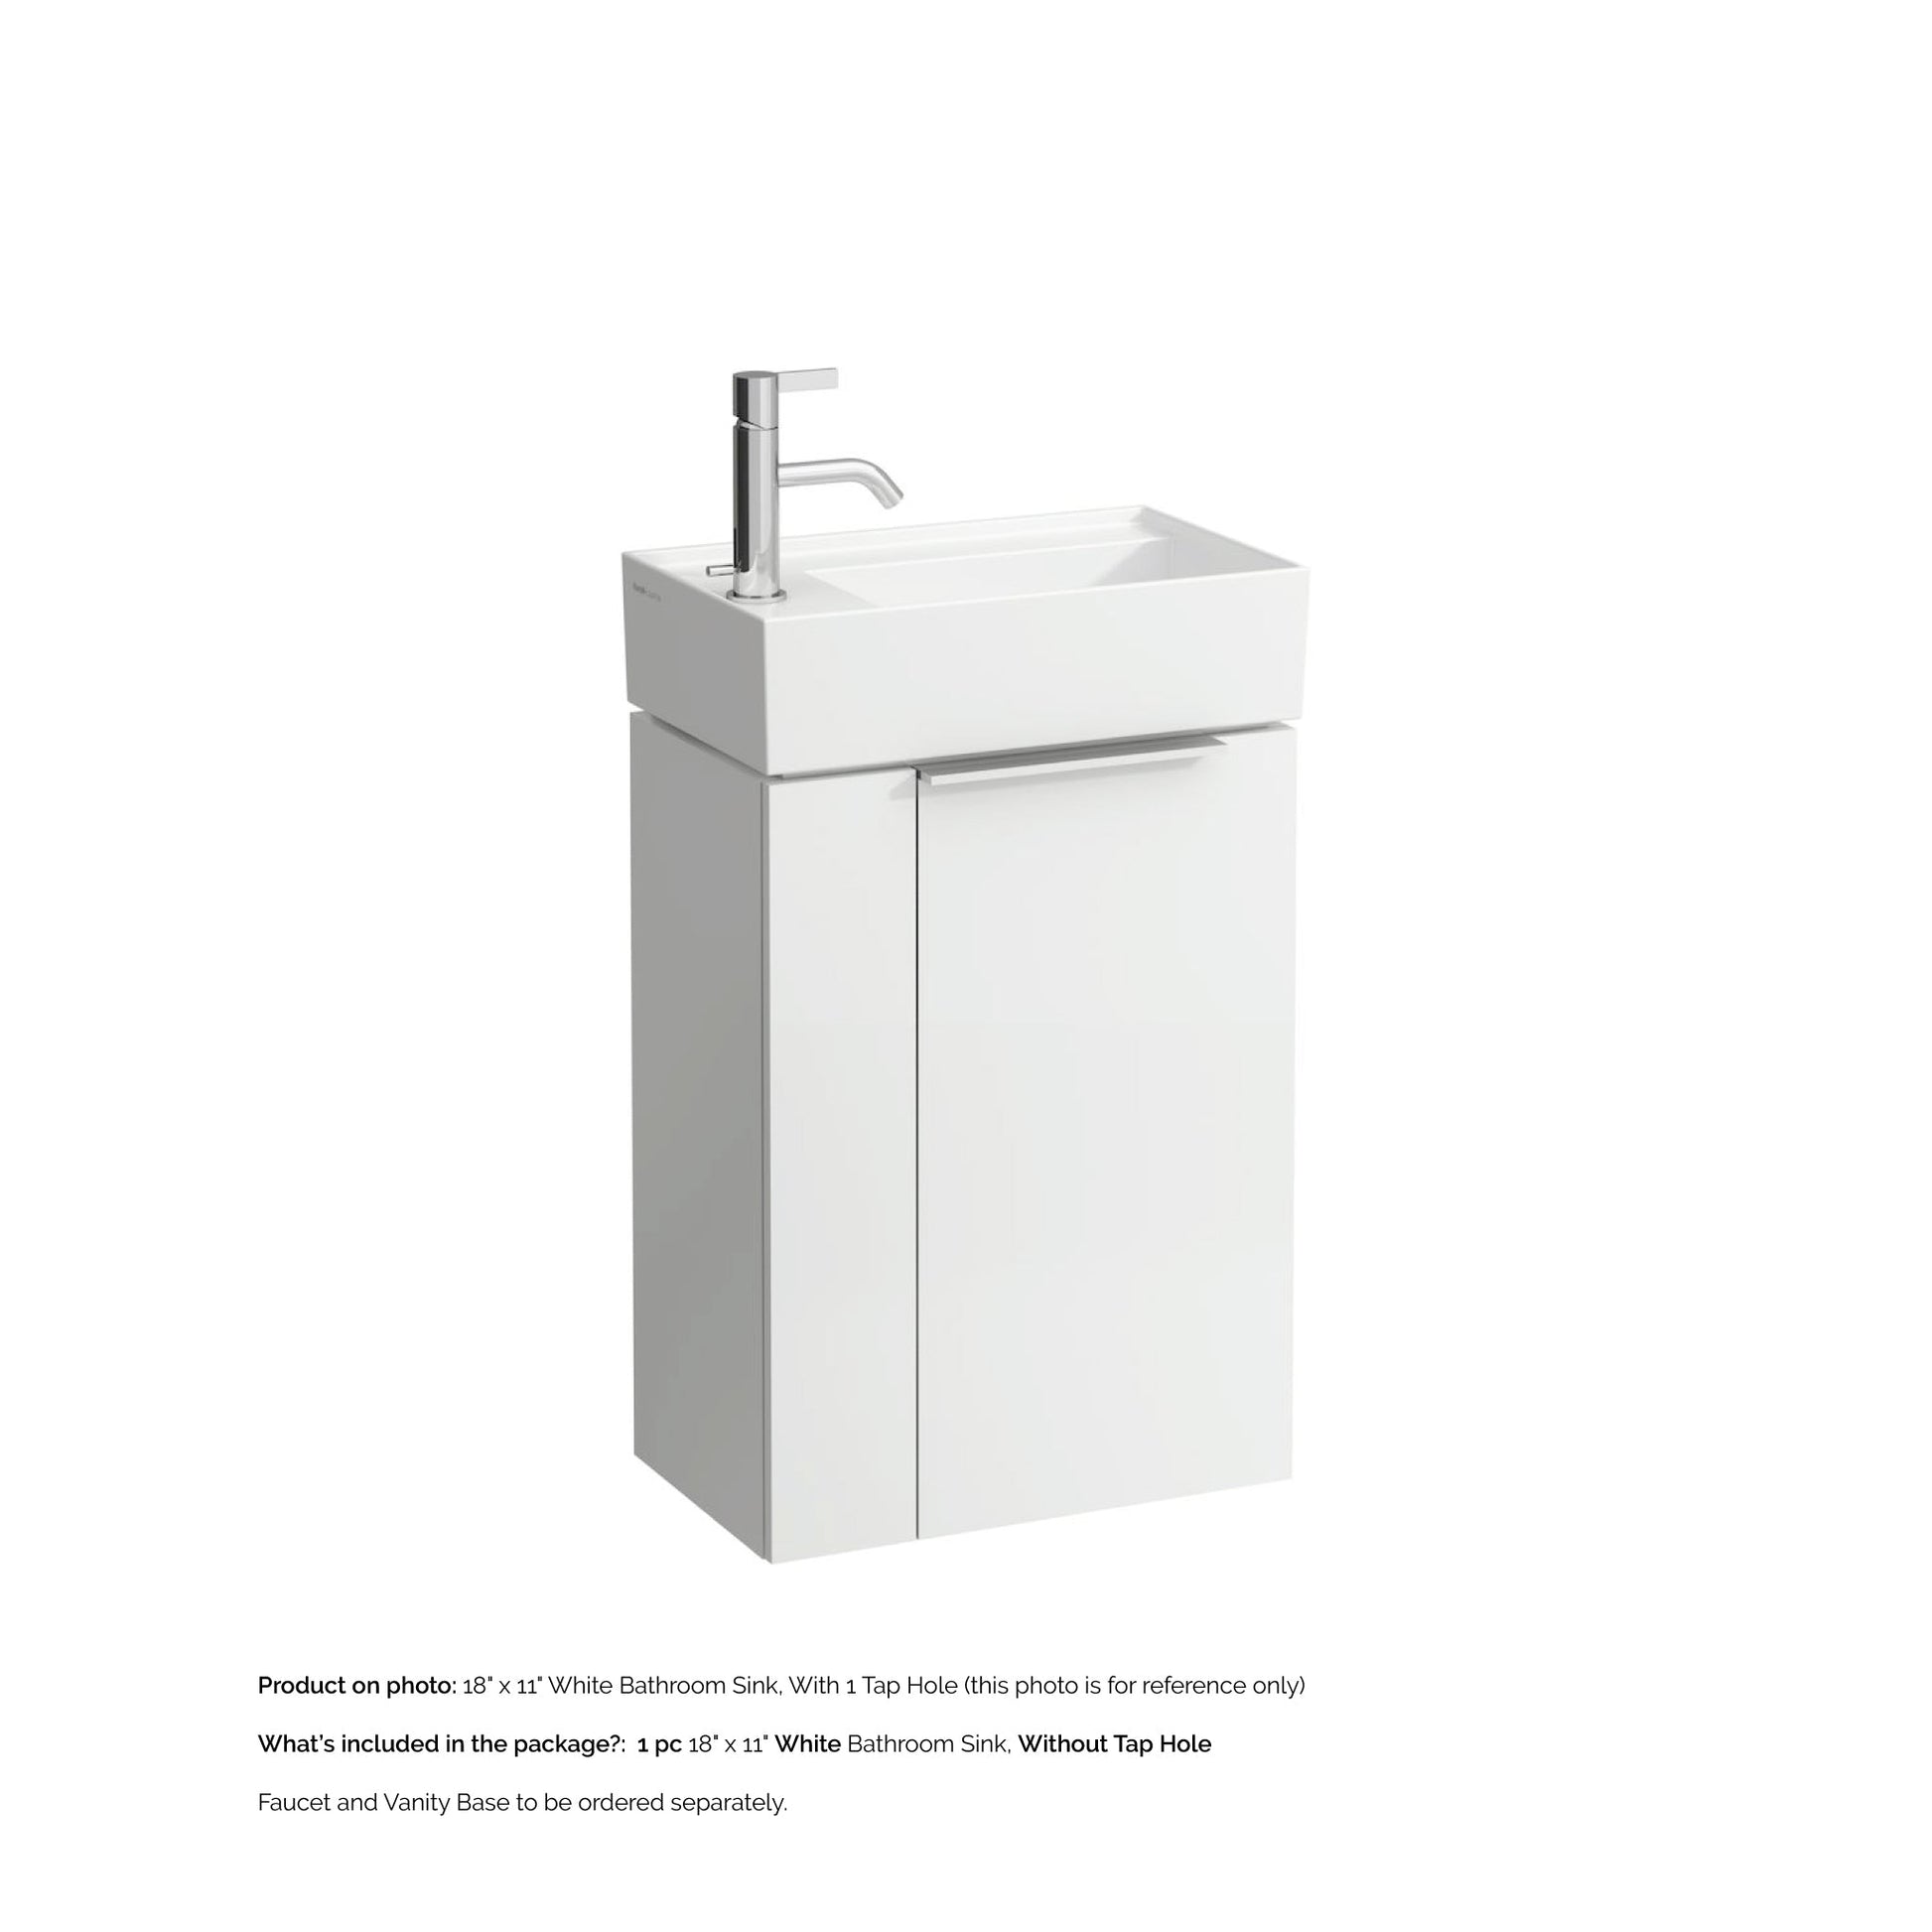 Laufen Kartell 18" x 11" White Wall-Mounted Tap Bank-Left Bathroom Sink Without Faucet Hole